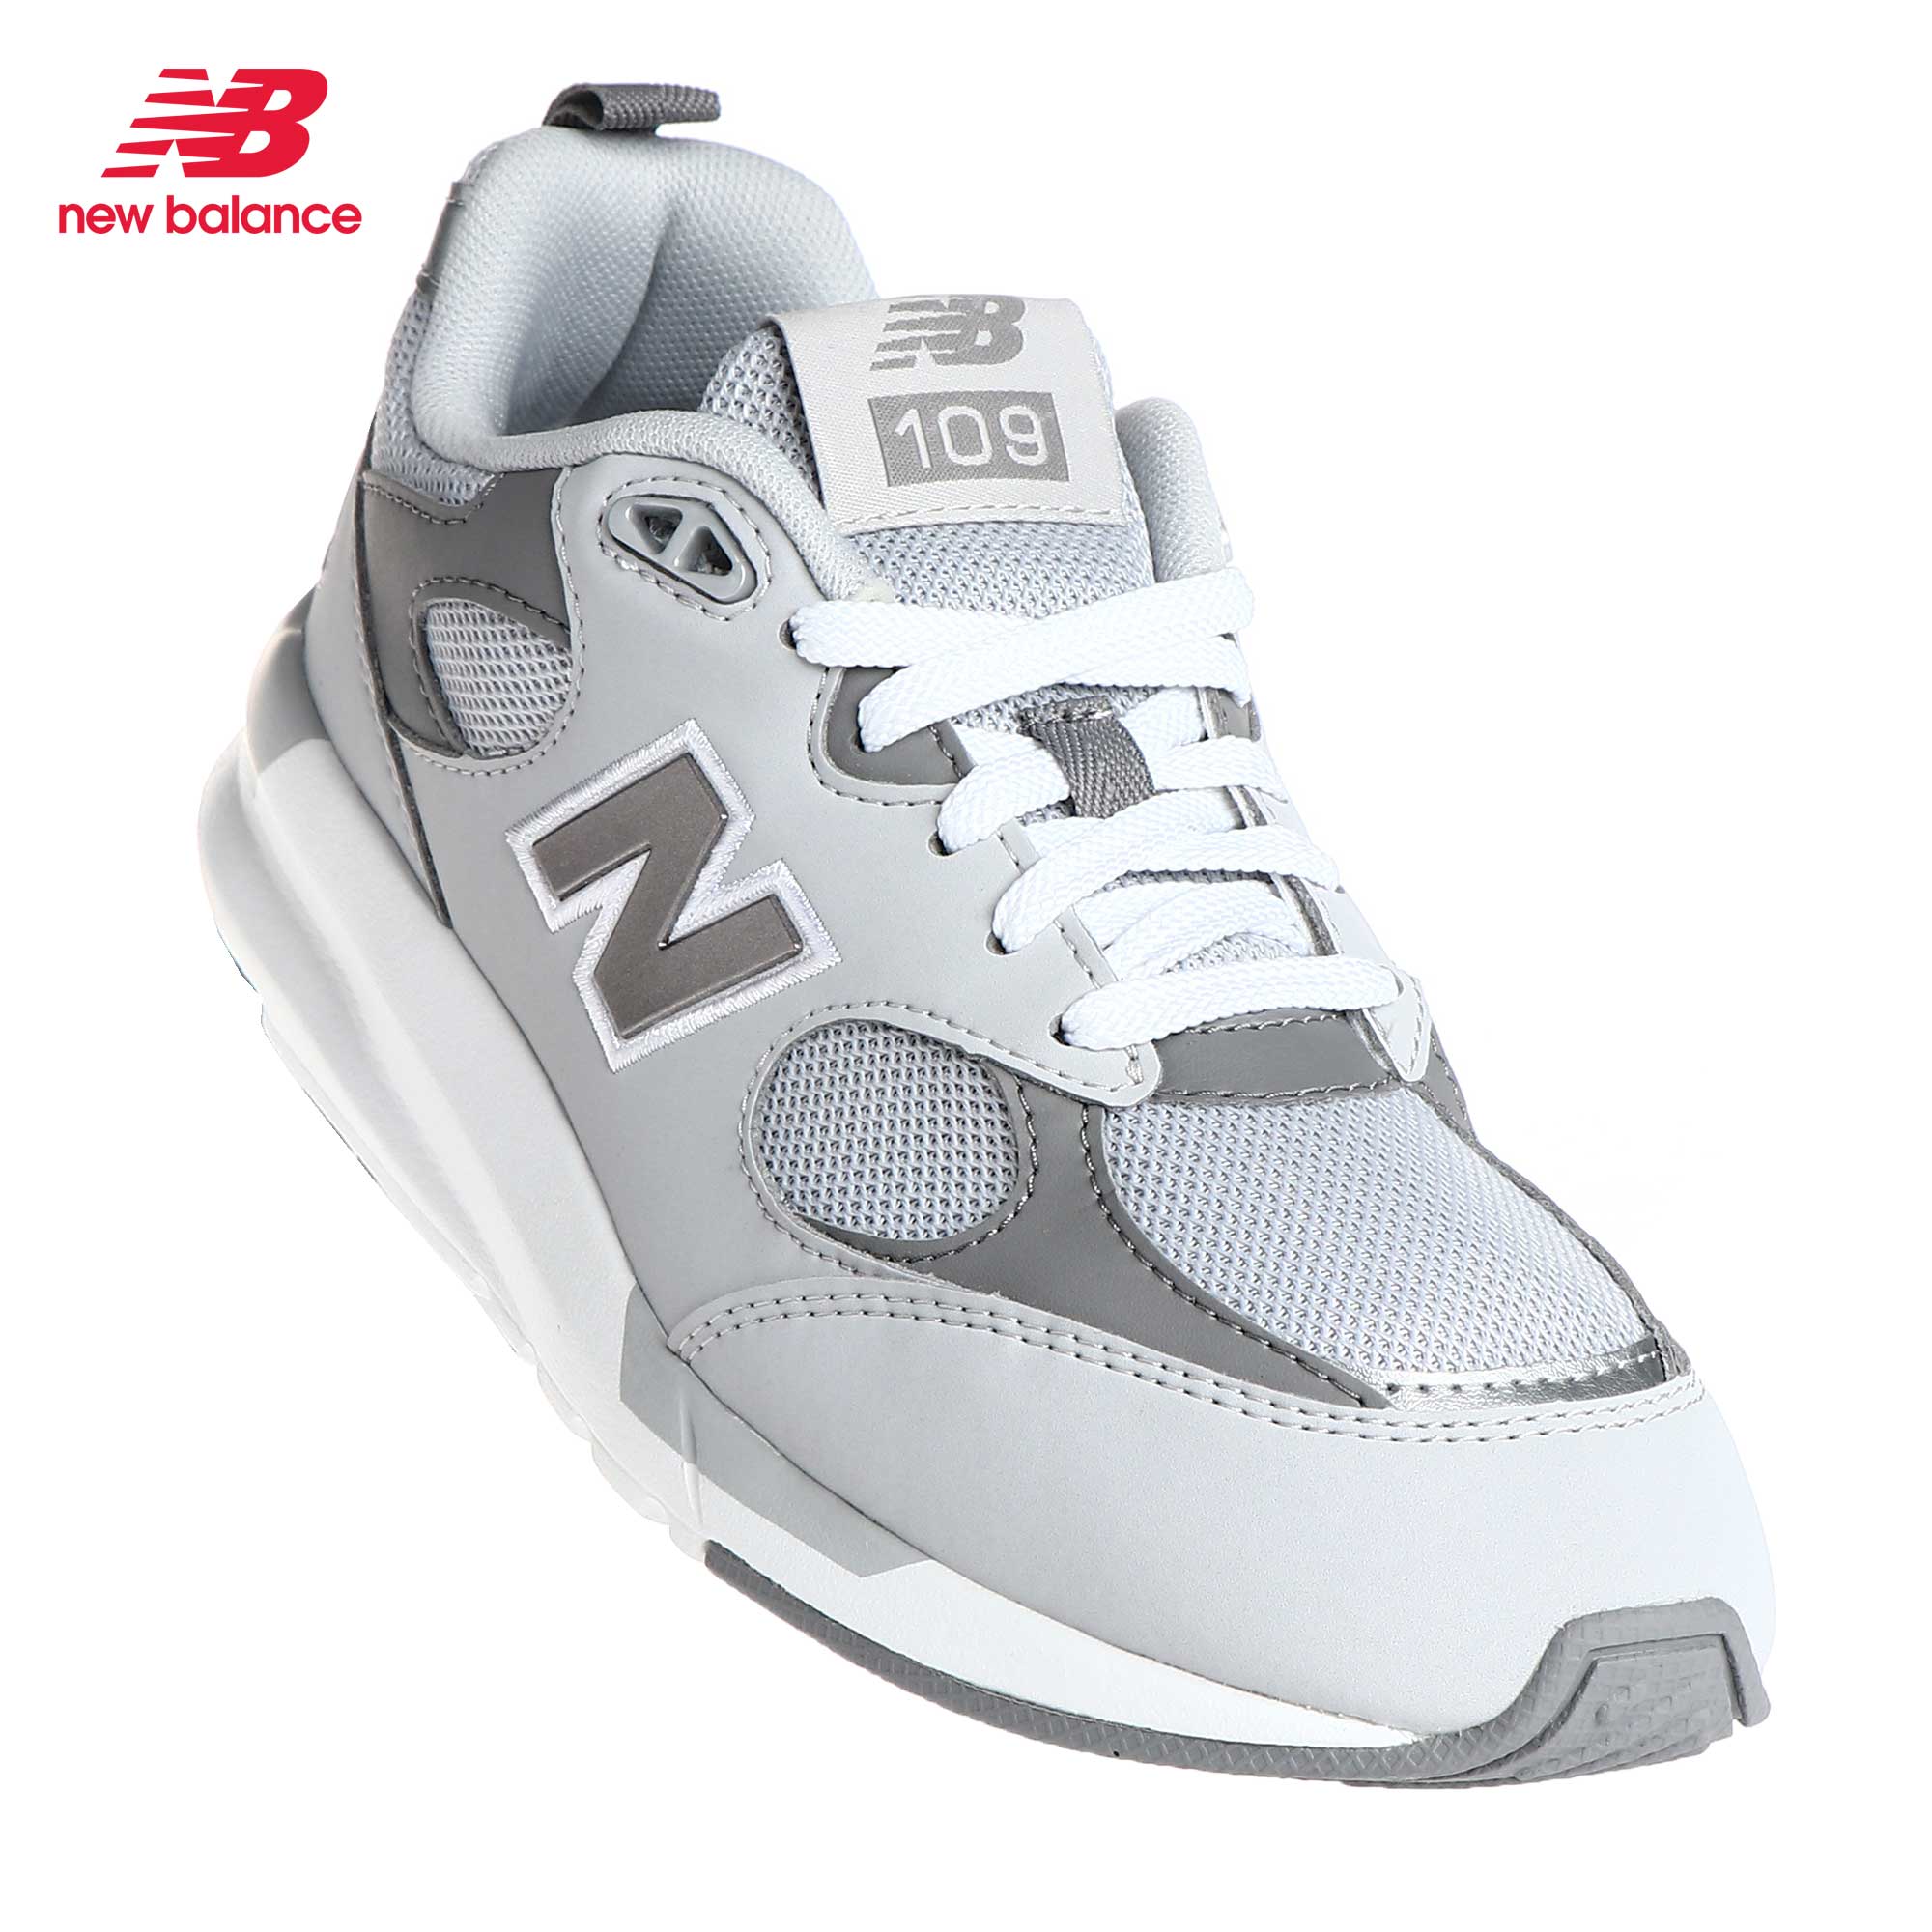 new balance shoes for women ph